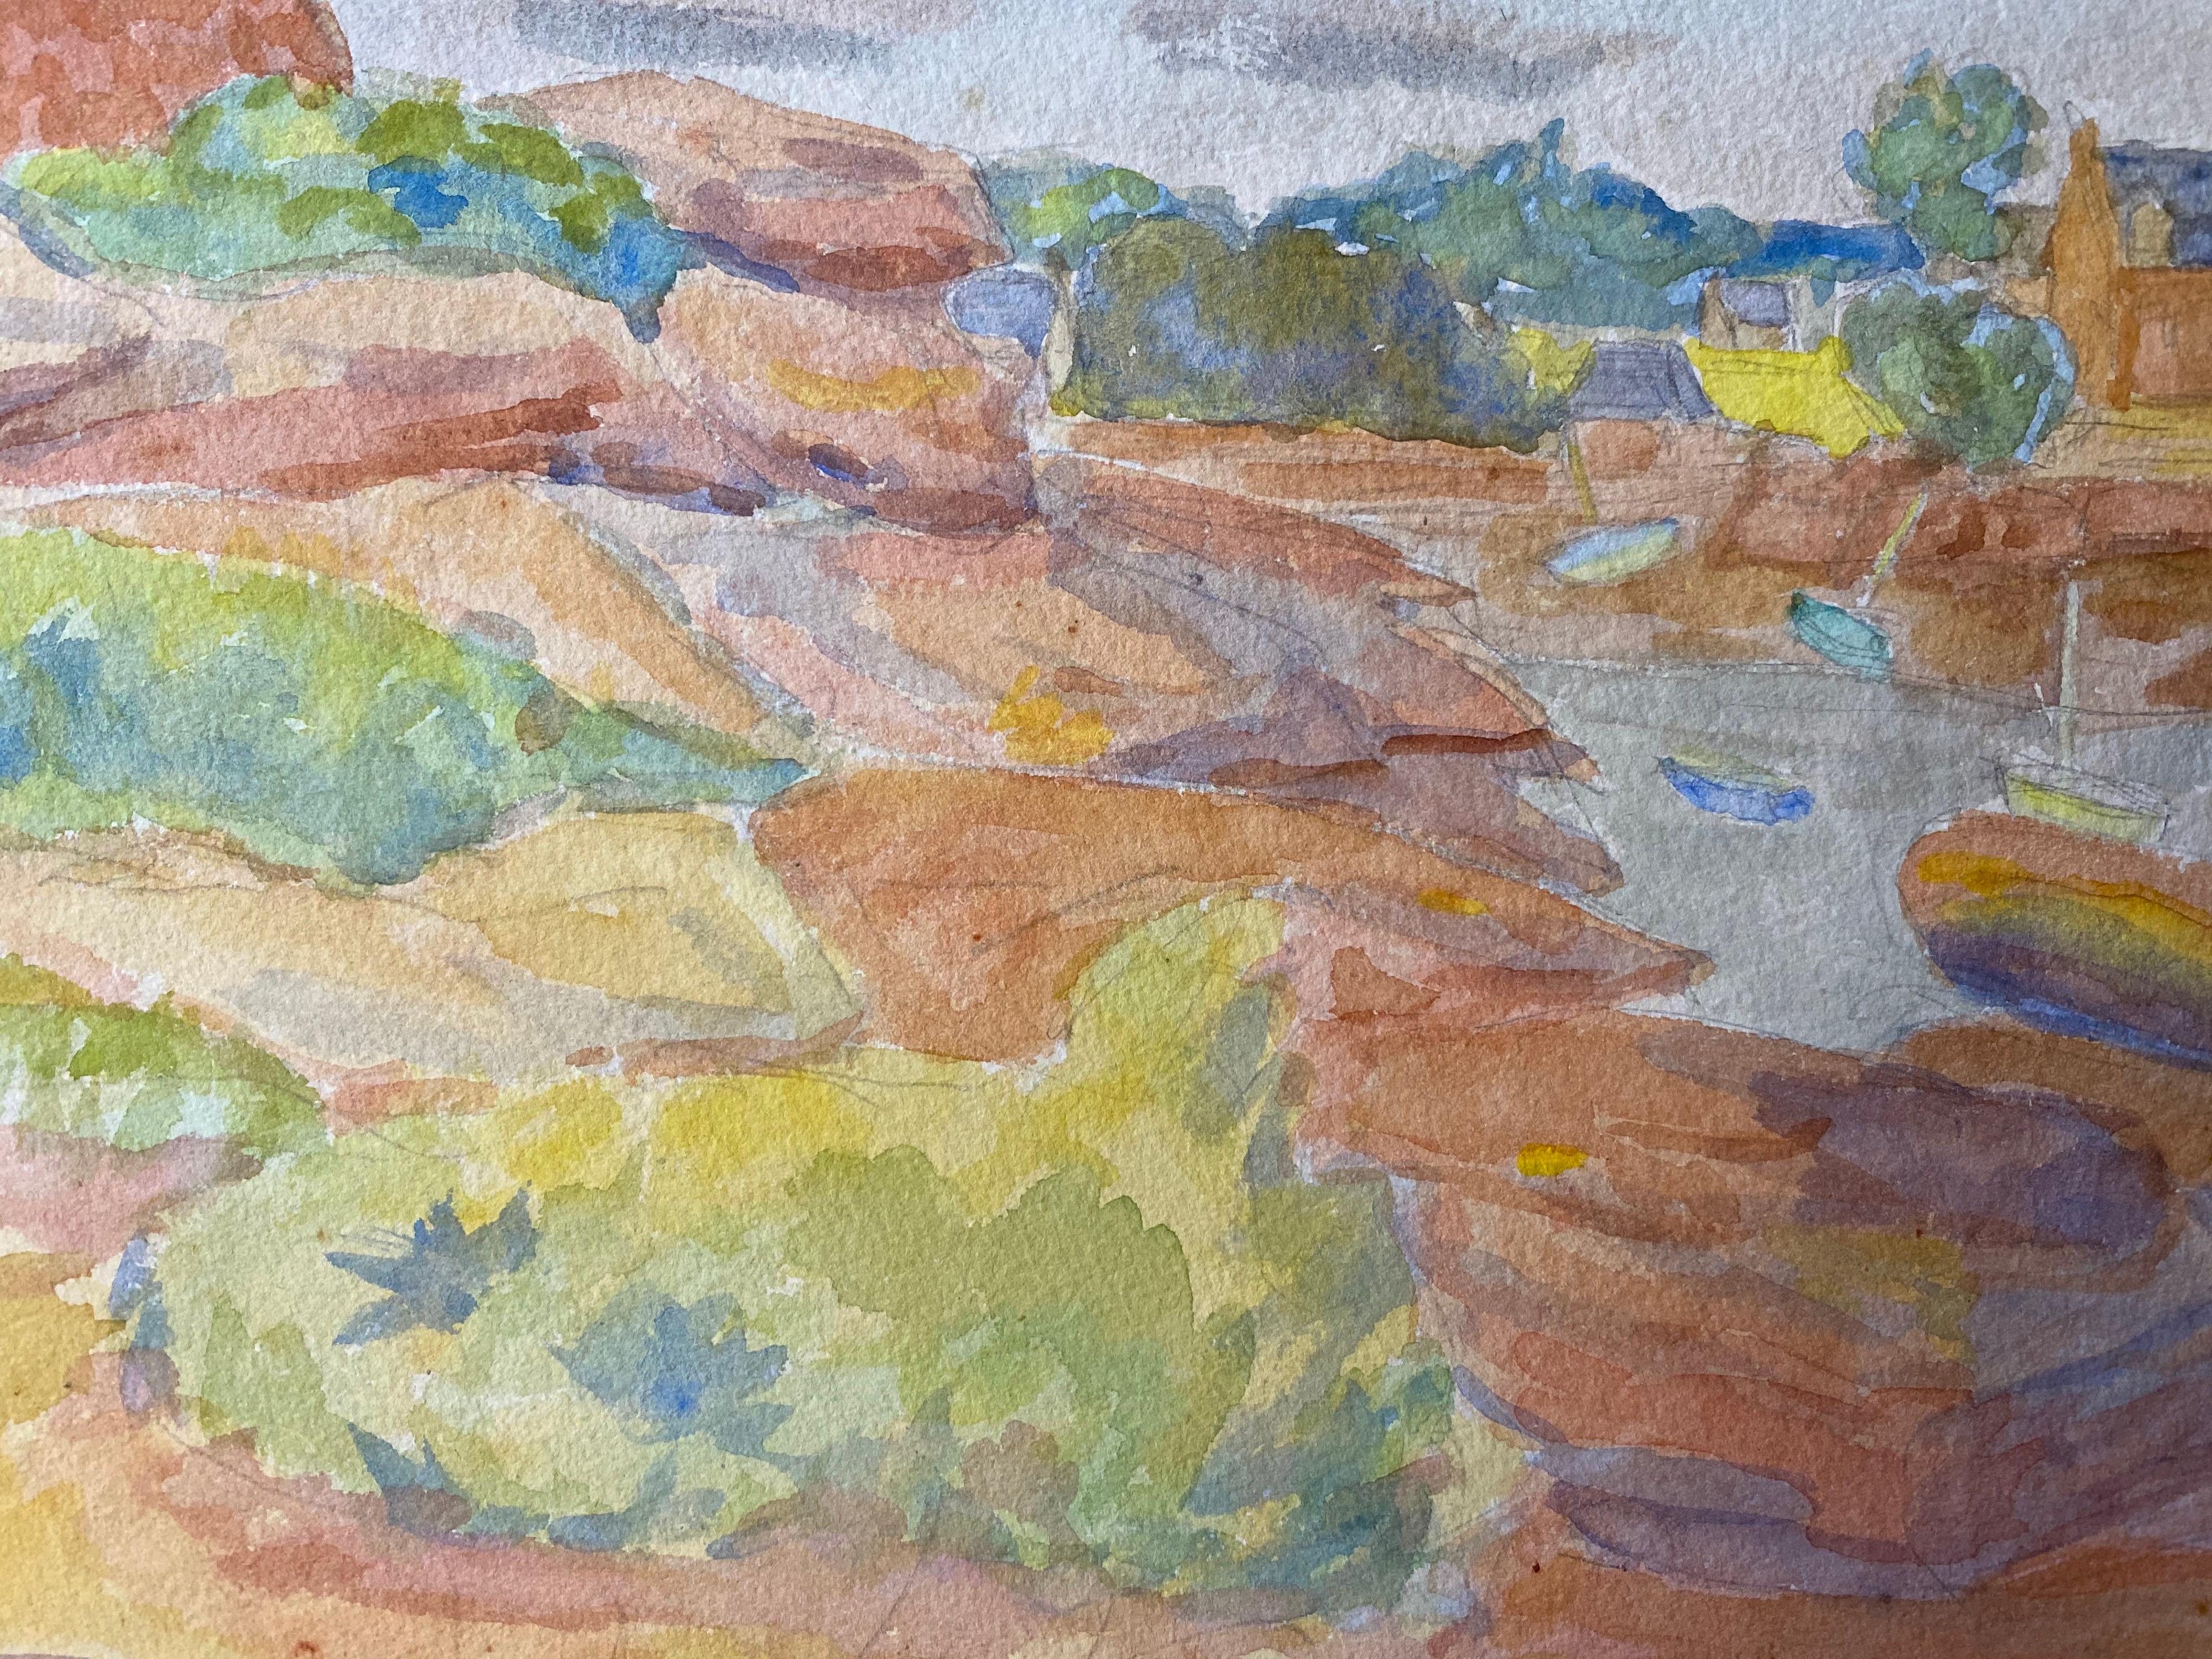 Provencal Landscape
by Louis Bellon (French 1908-1998)
From a batch of similar work where most were dated 1942-1947
watercolour painting on paper, unframed

measurements: 10 x 13.5 inches

provenance: private collection of the artists work,